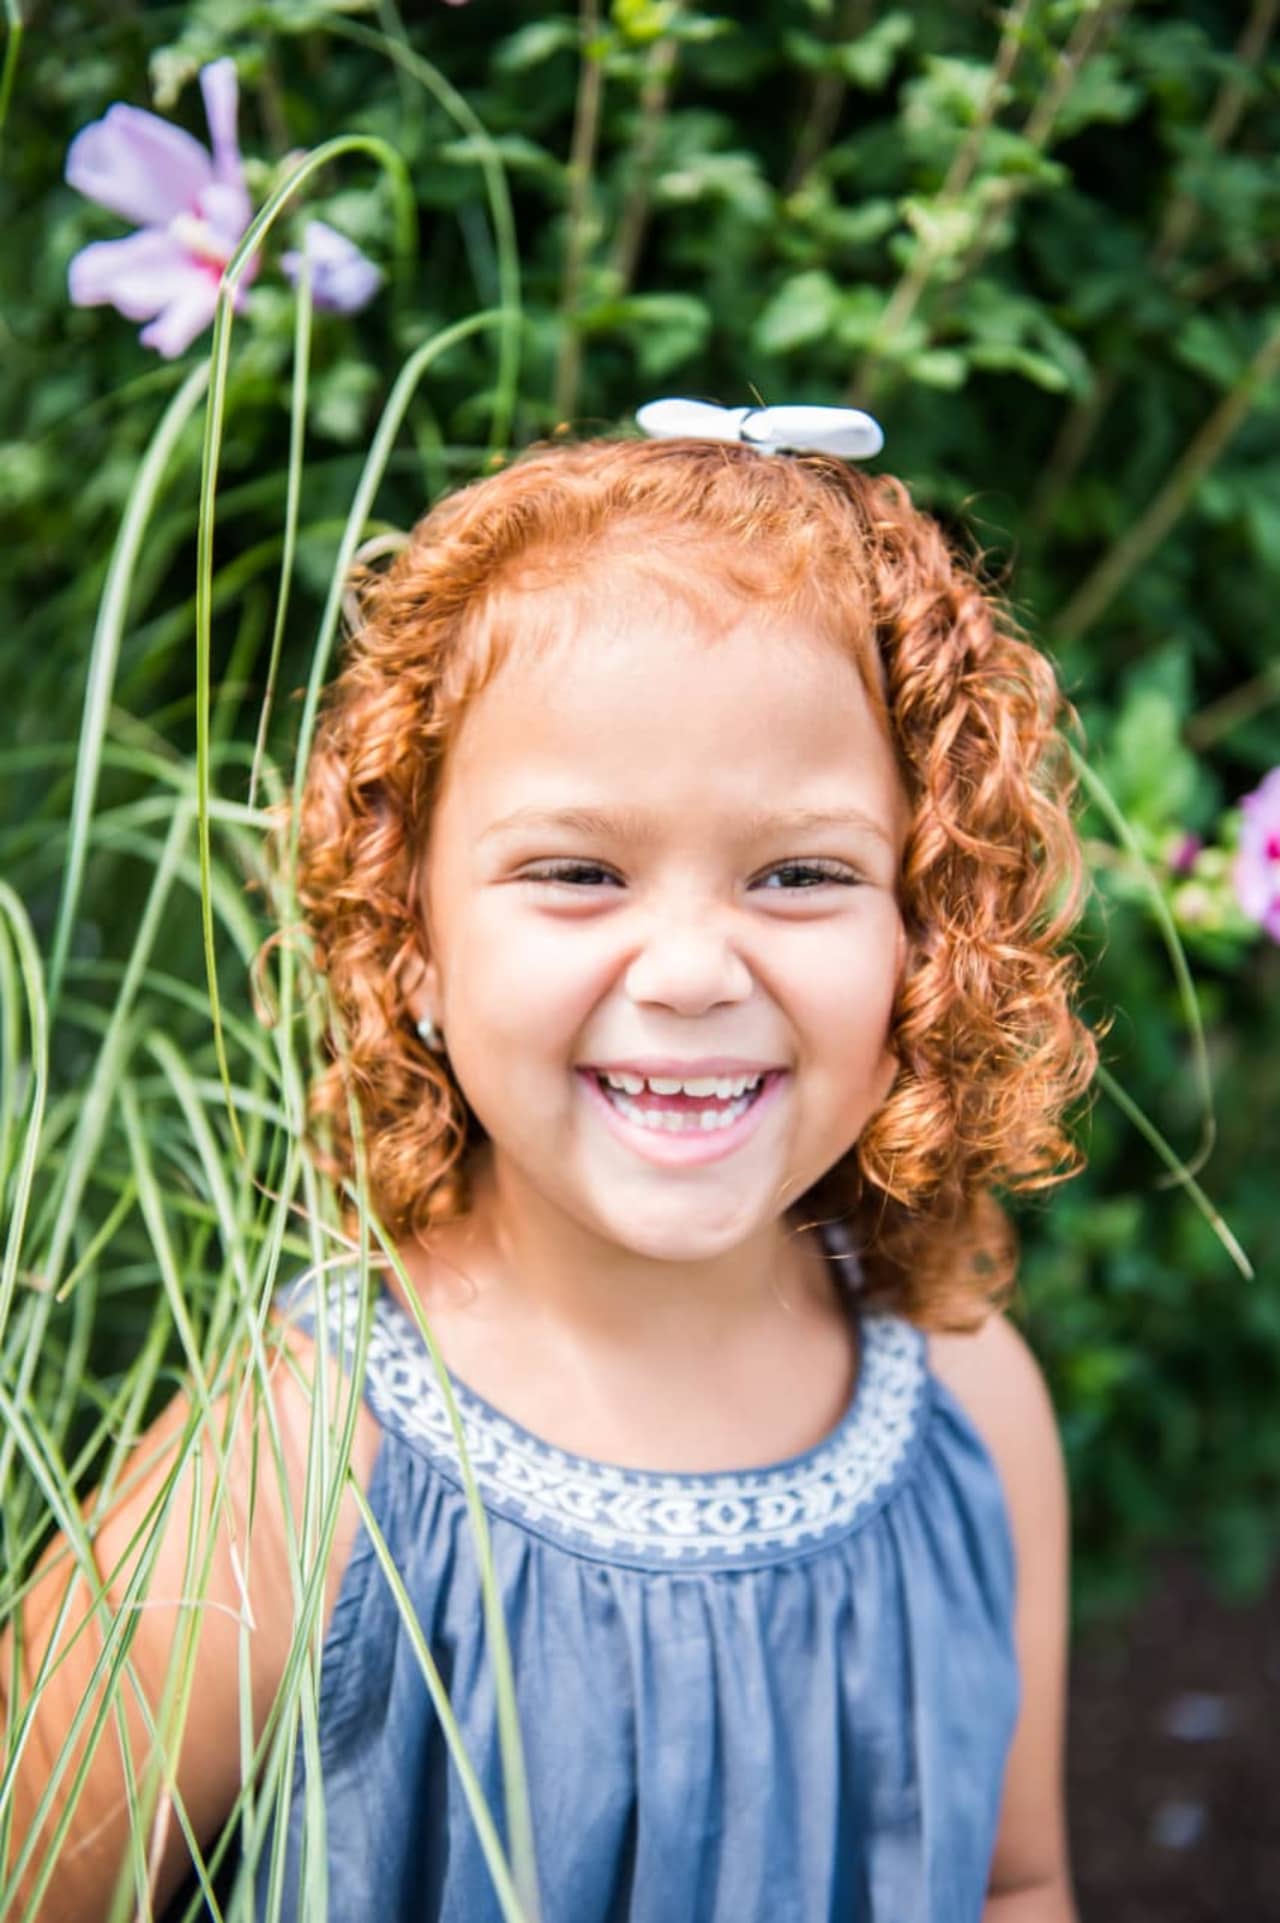 Children like Rianne, who was treated at Maria Fareri Children's Hospital for myocarditis, will benefit from the upcoming 12th Annual Radiothon For the Kids, hosted by 100.7 WHUD.